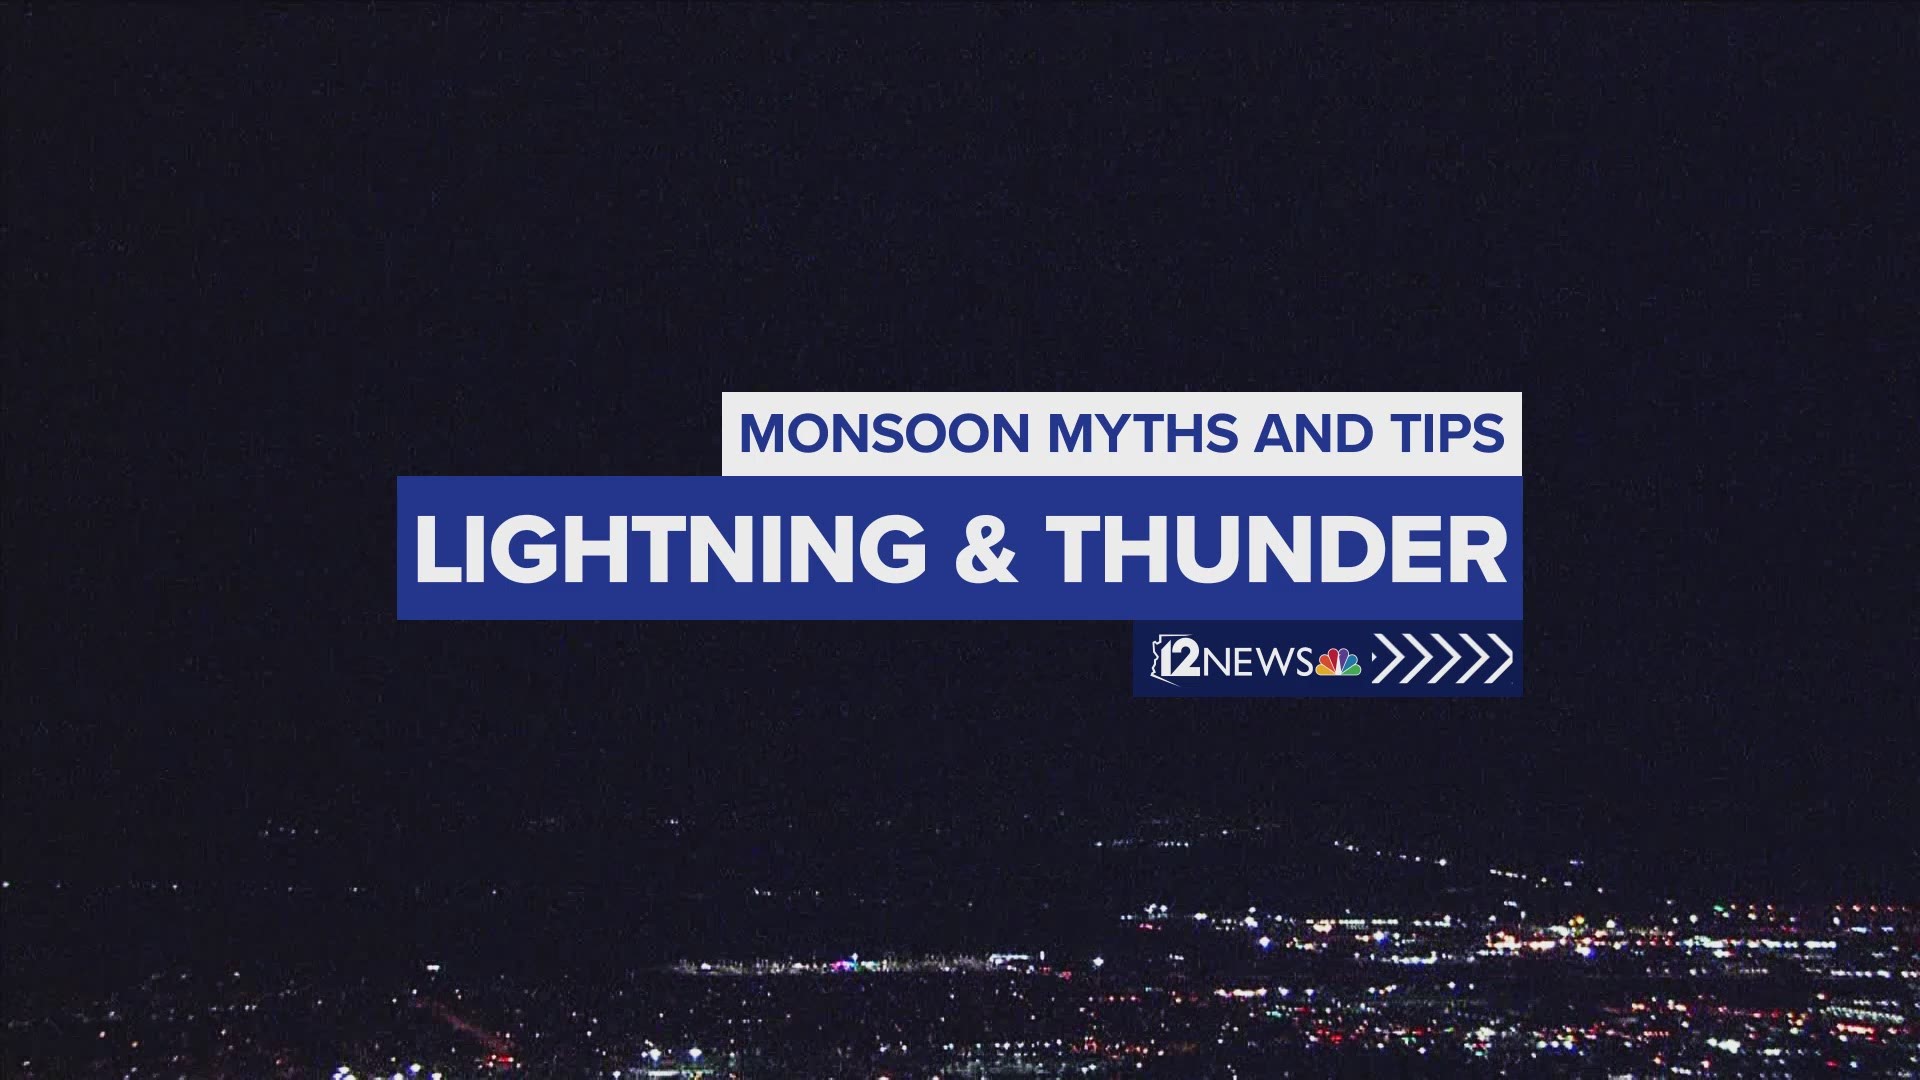 Lindsay Riley and Kristen Keogh share some important tips and information about thunder and lightning so you can be ready when the monsoon hits.